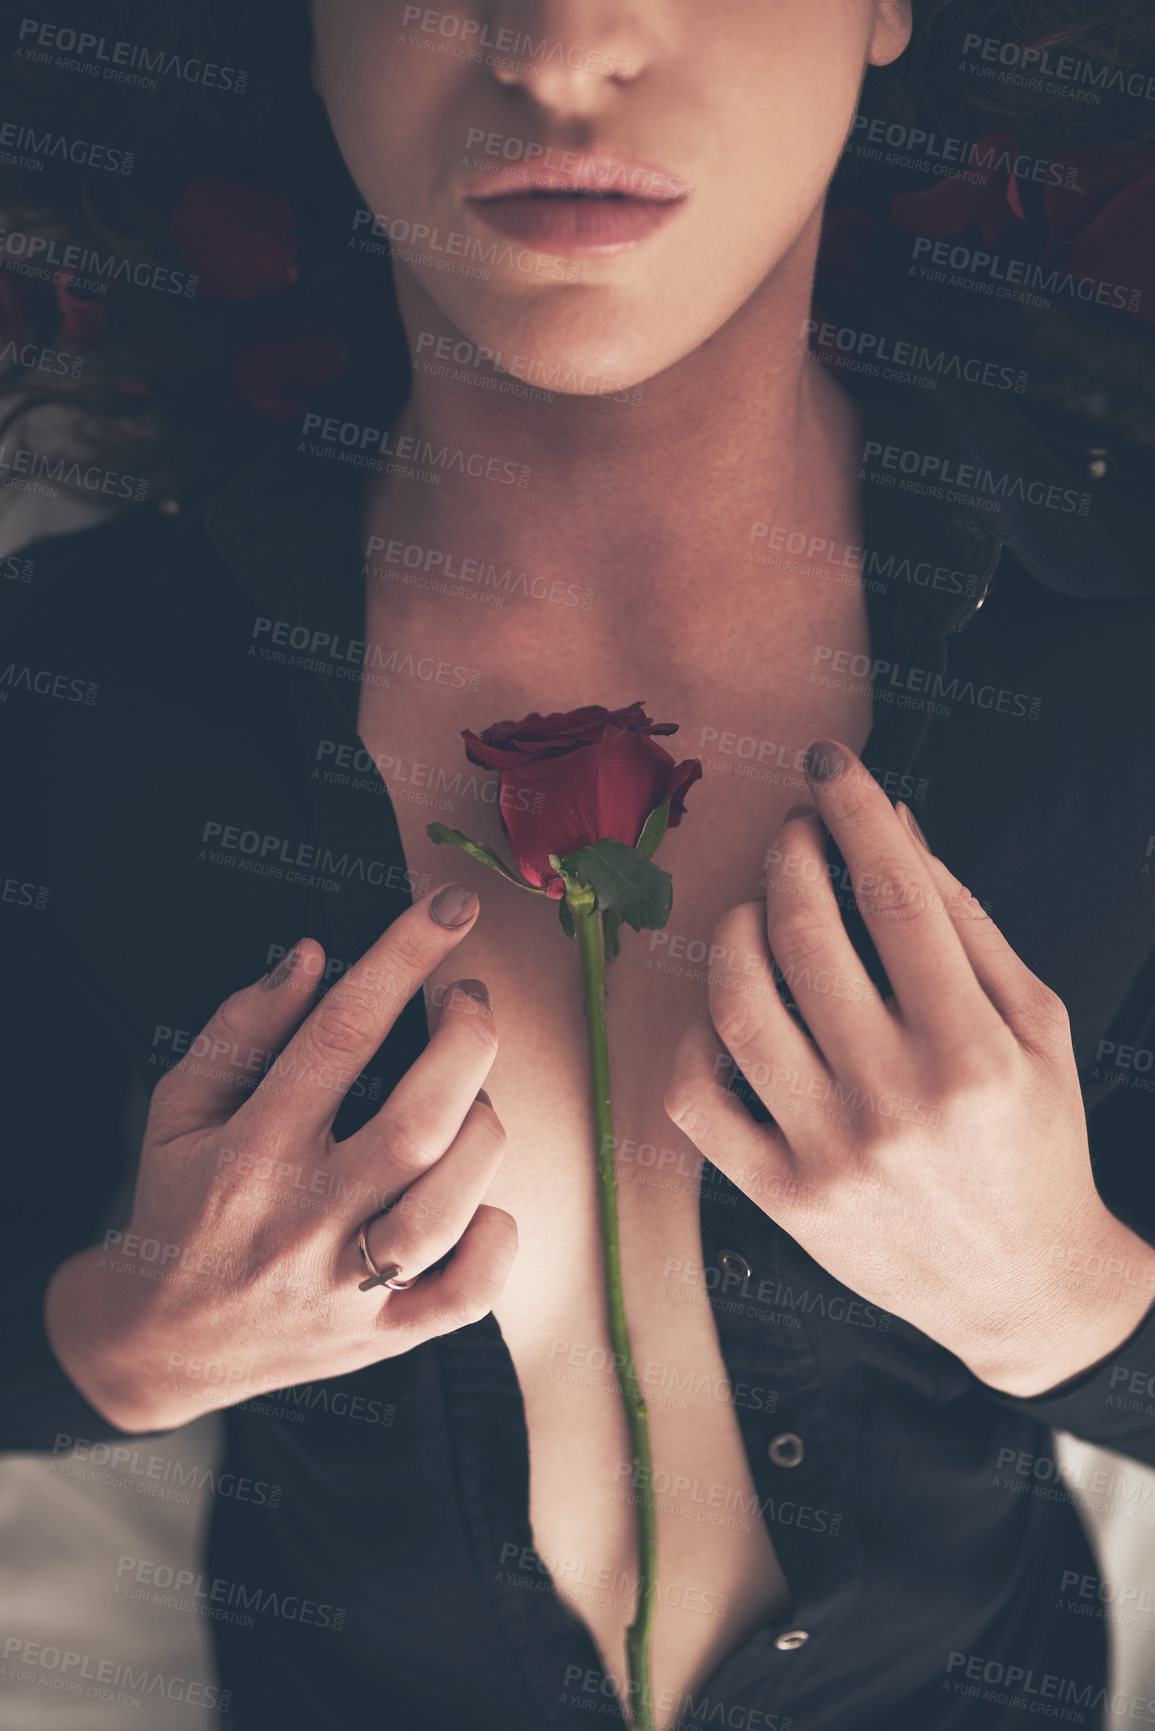 Buy stock photo High angle shot of an unidentifiable young woman opening her shirt in bed to reveal a rose on her chest